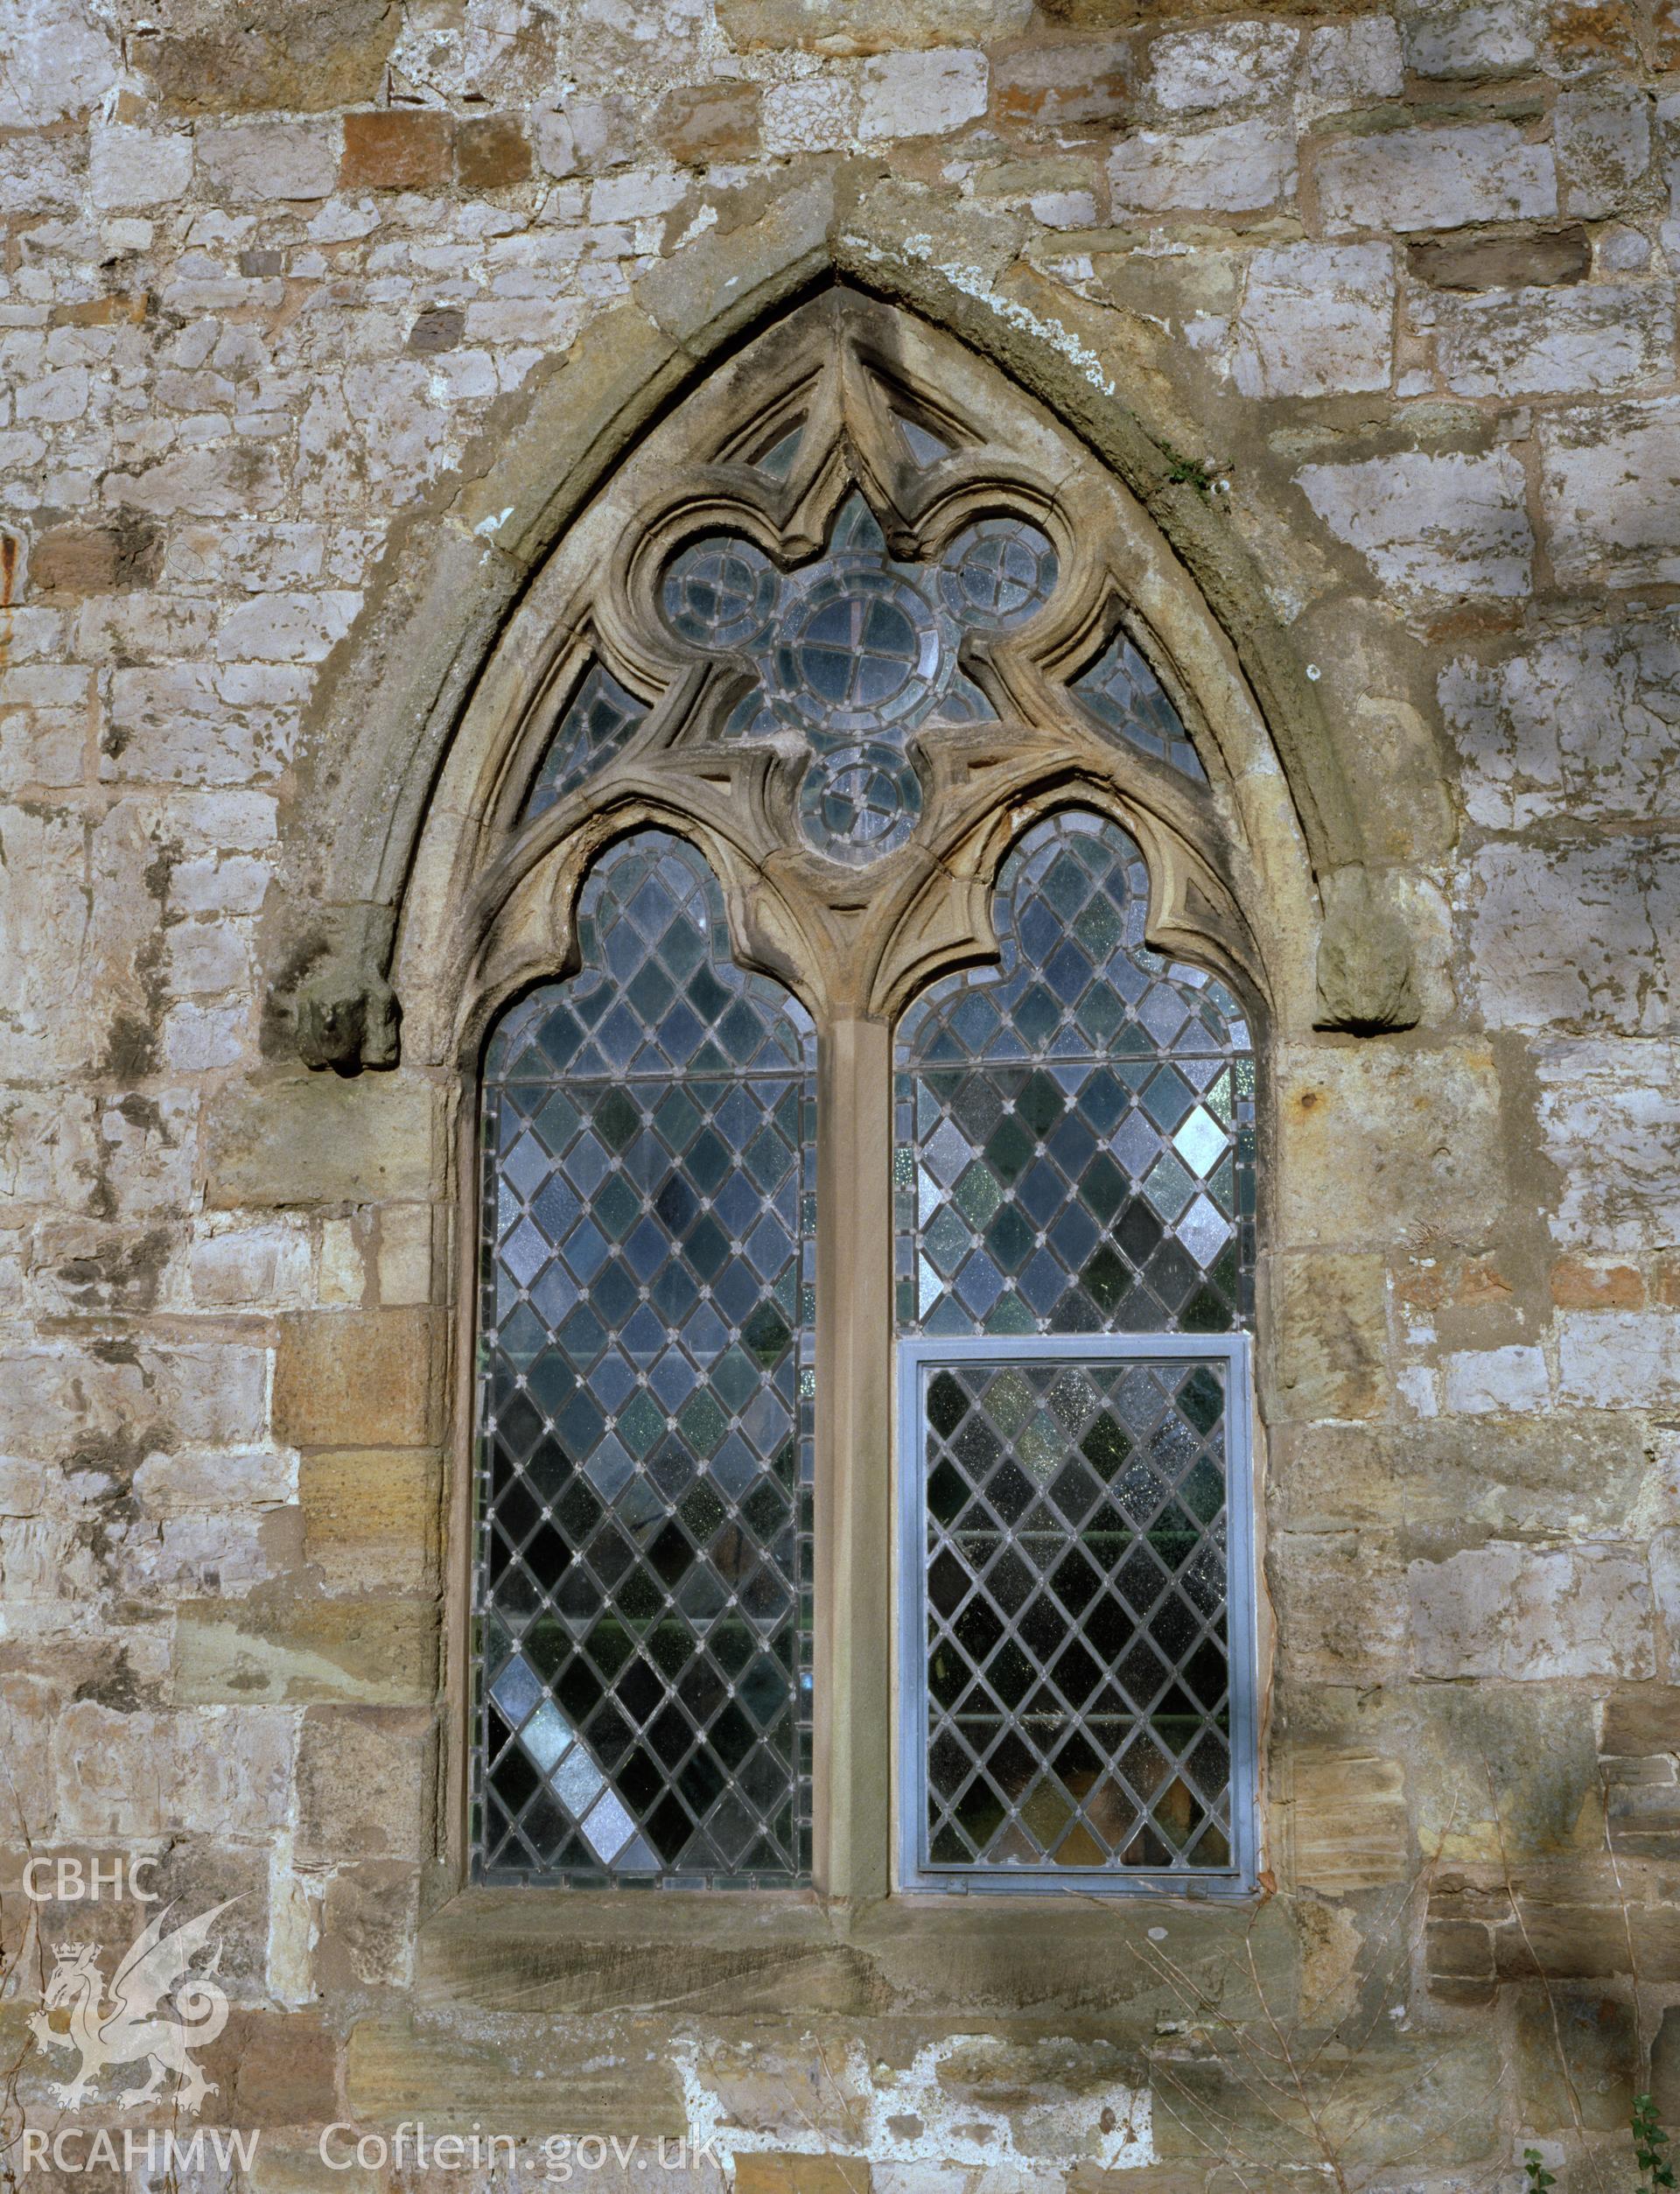 Digital copy of a colour negative showing detail view of the south window to the east of the porch at St Mary's Church, Conwy.